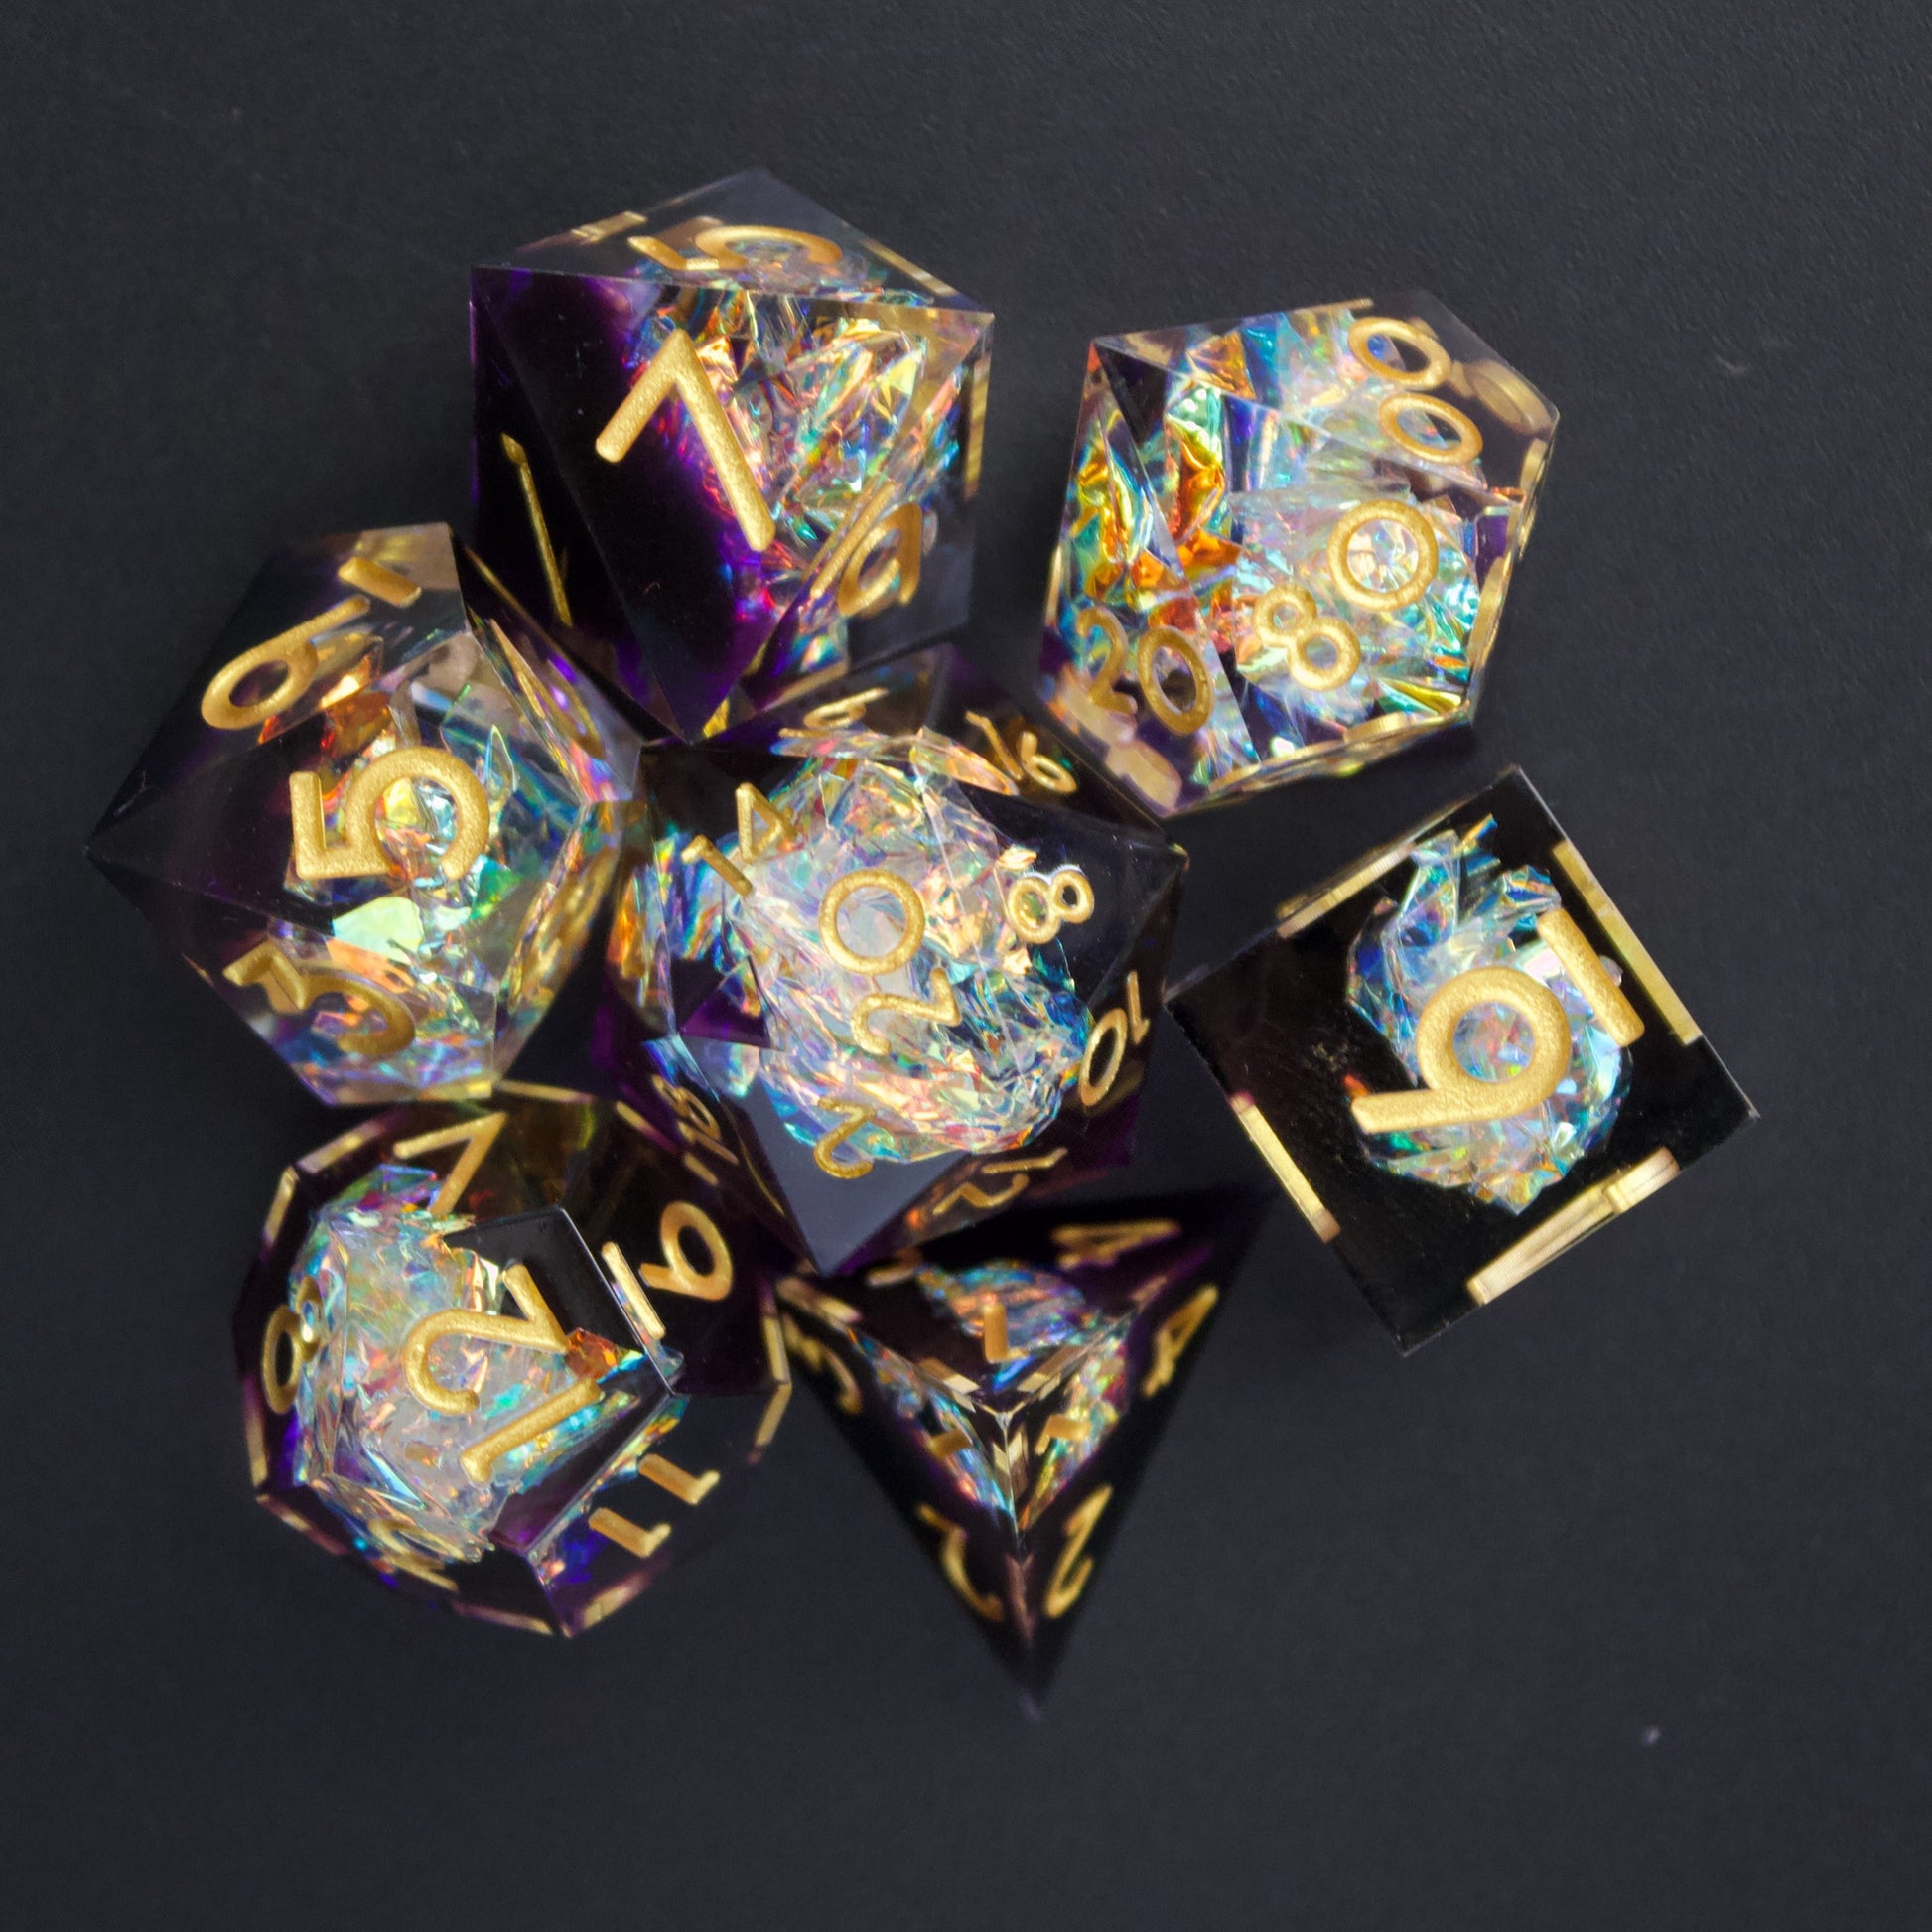 Sharp edge glitter dice sets for DND dungeons and dragons, TTRPG role playing games and dice goblin, dice dragon collectors